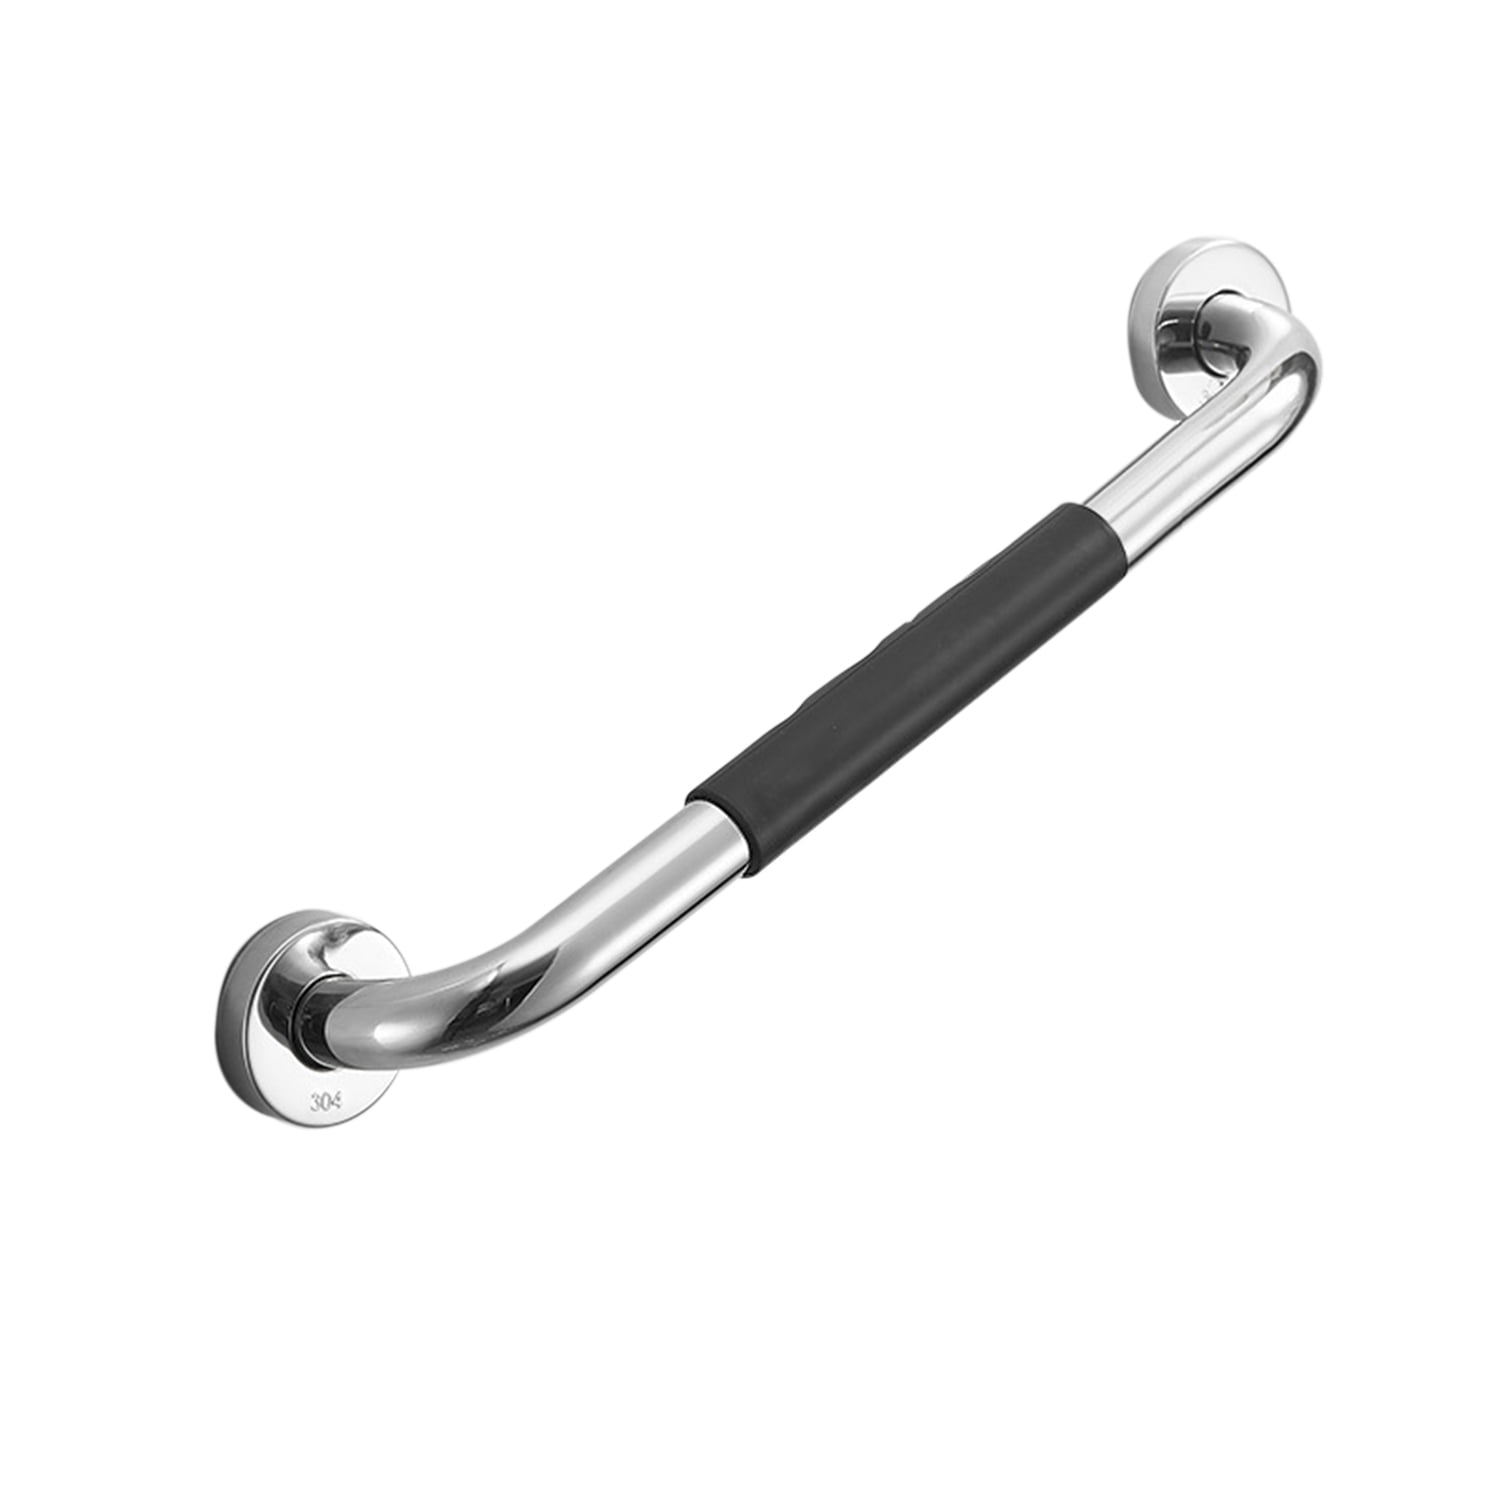 Safety Support Rail Stainless Steel Grab Bar with Anti-Slip Grip Handle Towel Holder Bath Shower Wall Mounted for Disabled Elderly Children Mobility 40cm Bathroom Handrail 